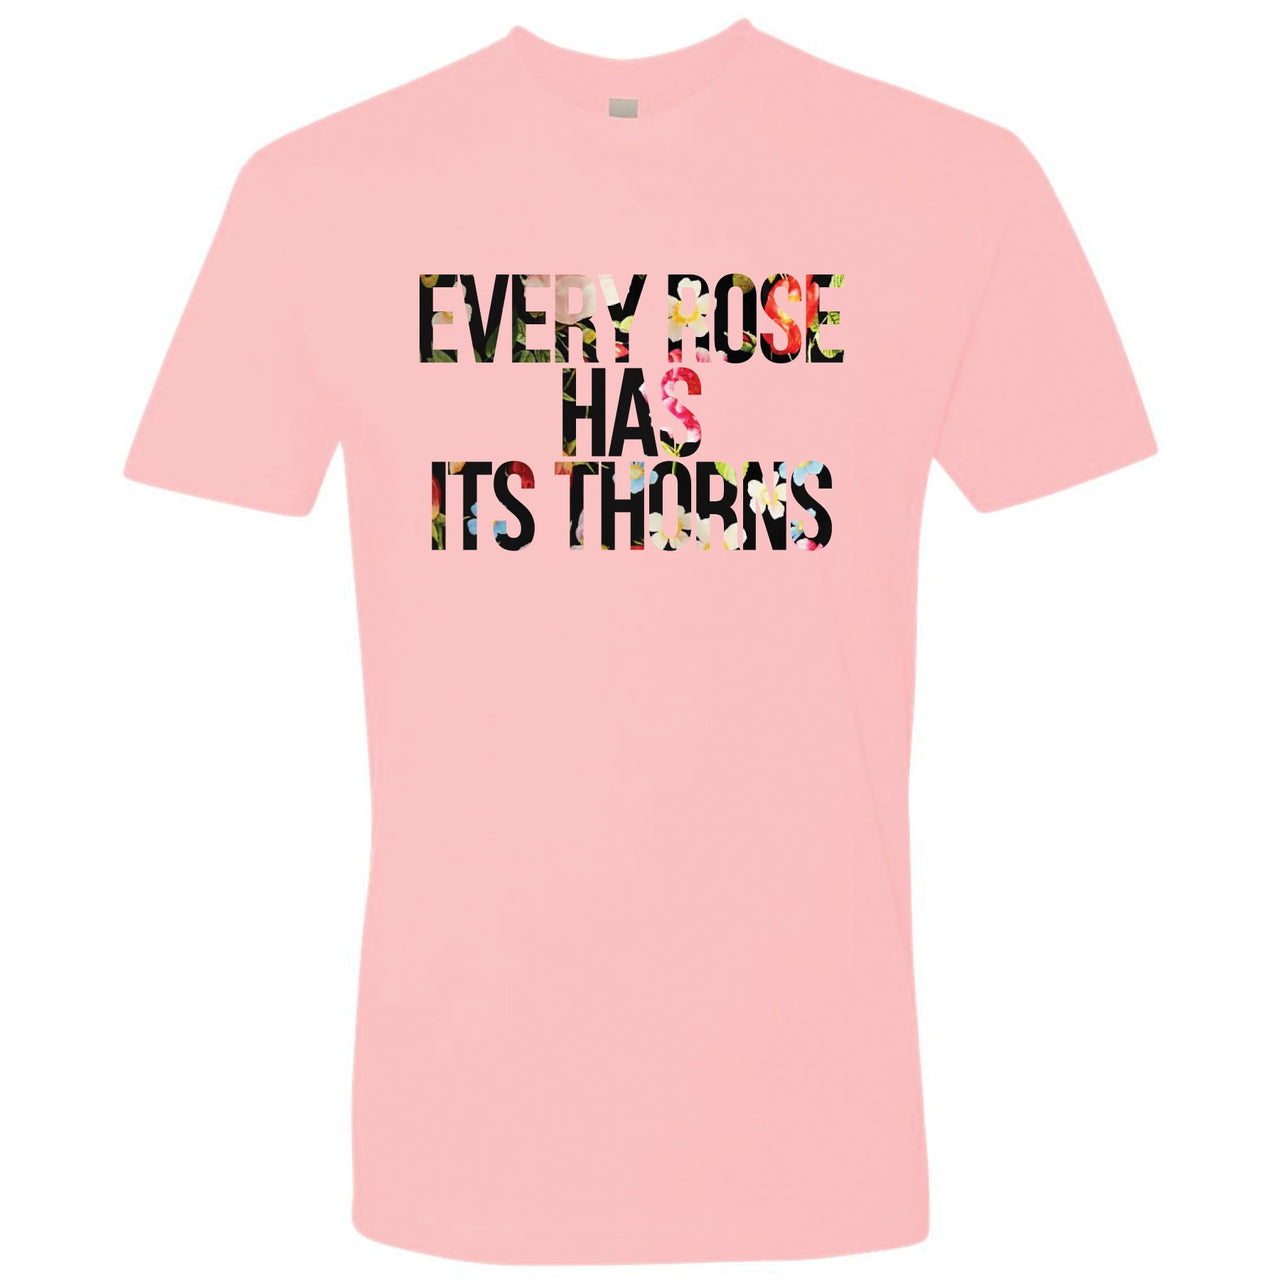 Floral One Foams T Shirt | Every Rose Has Its Thorns, Pink